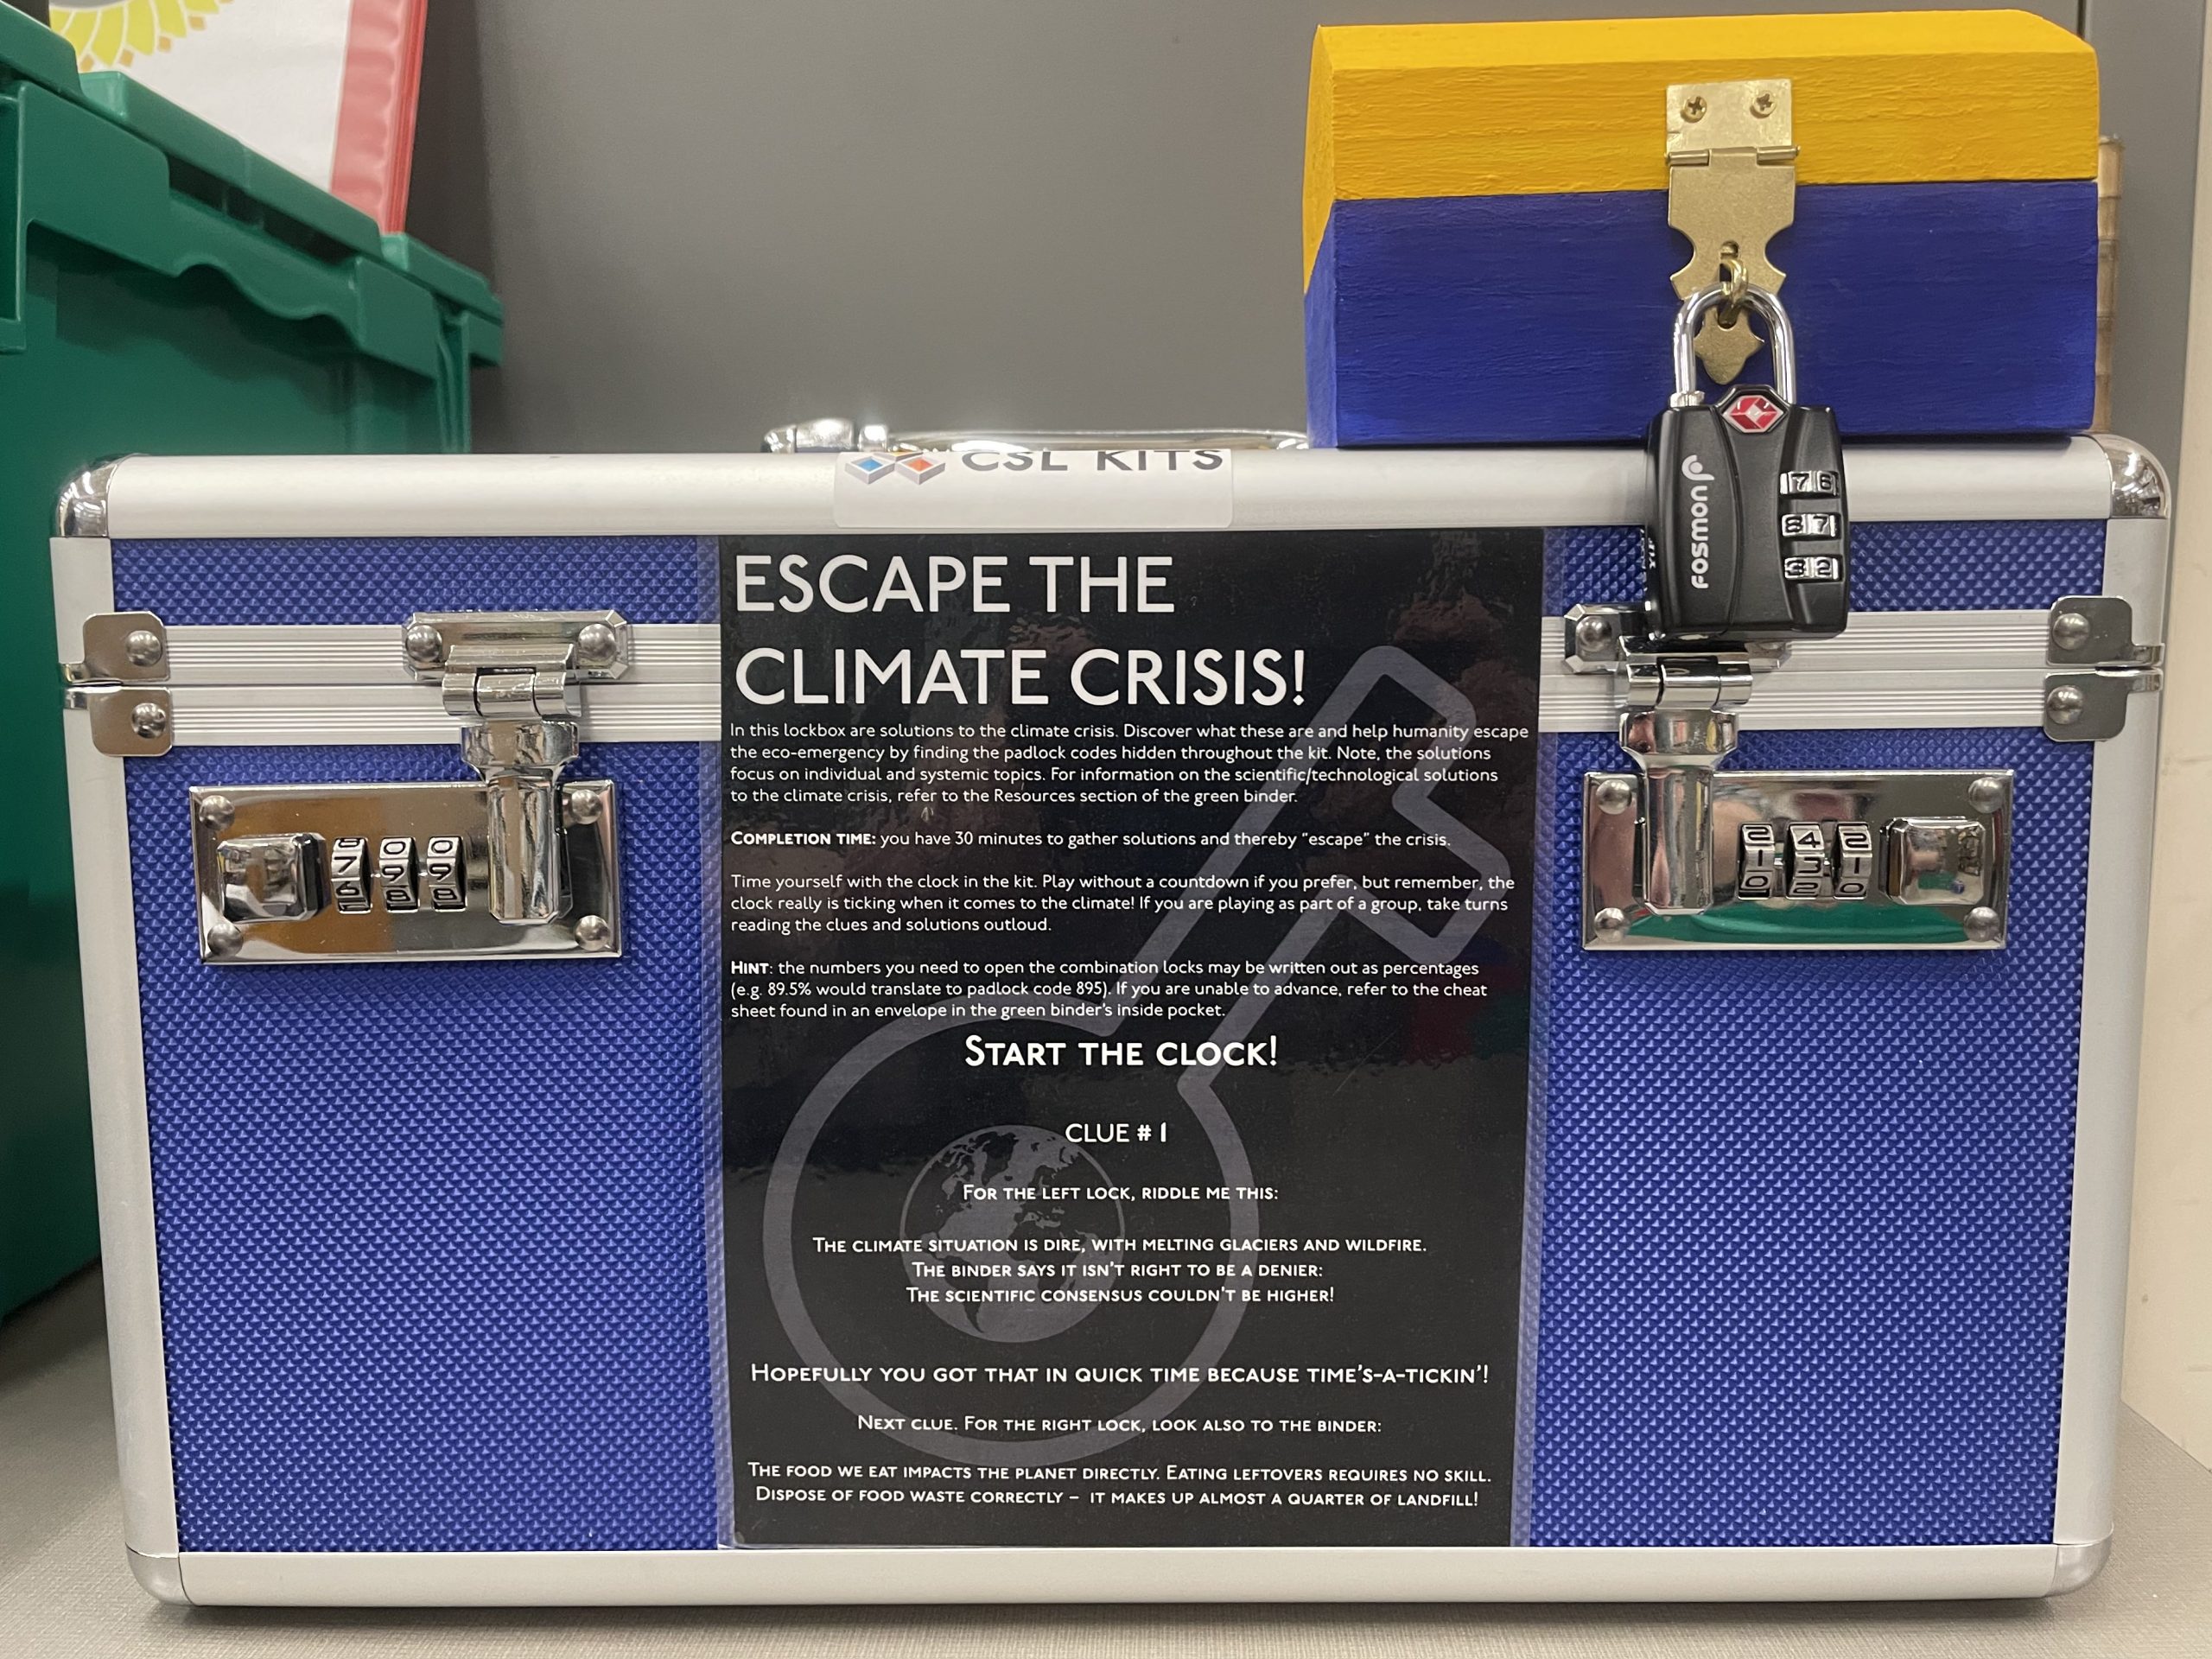 Escape the Climate Crisis lockbox, showing instructions and one example smaller box with padlock